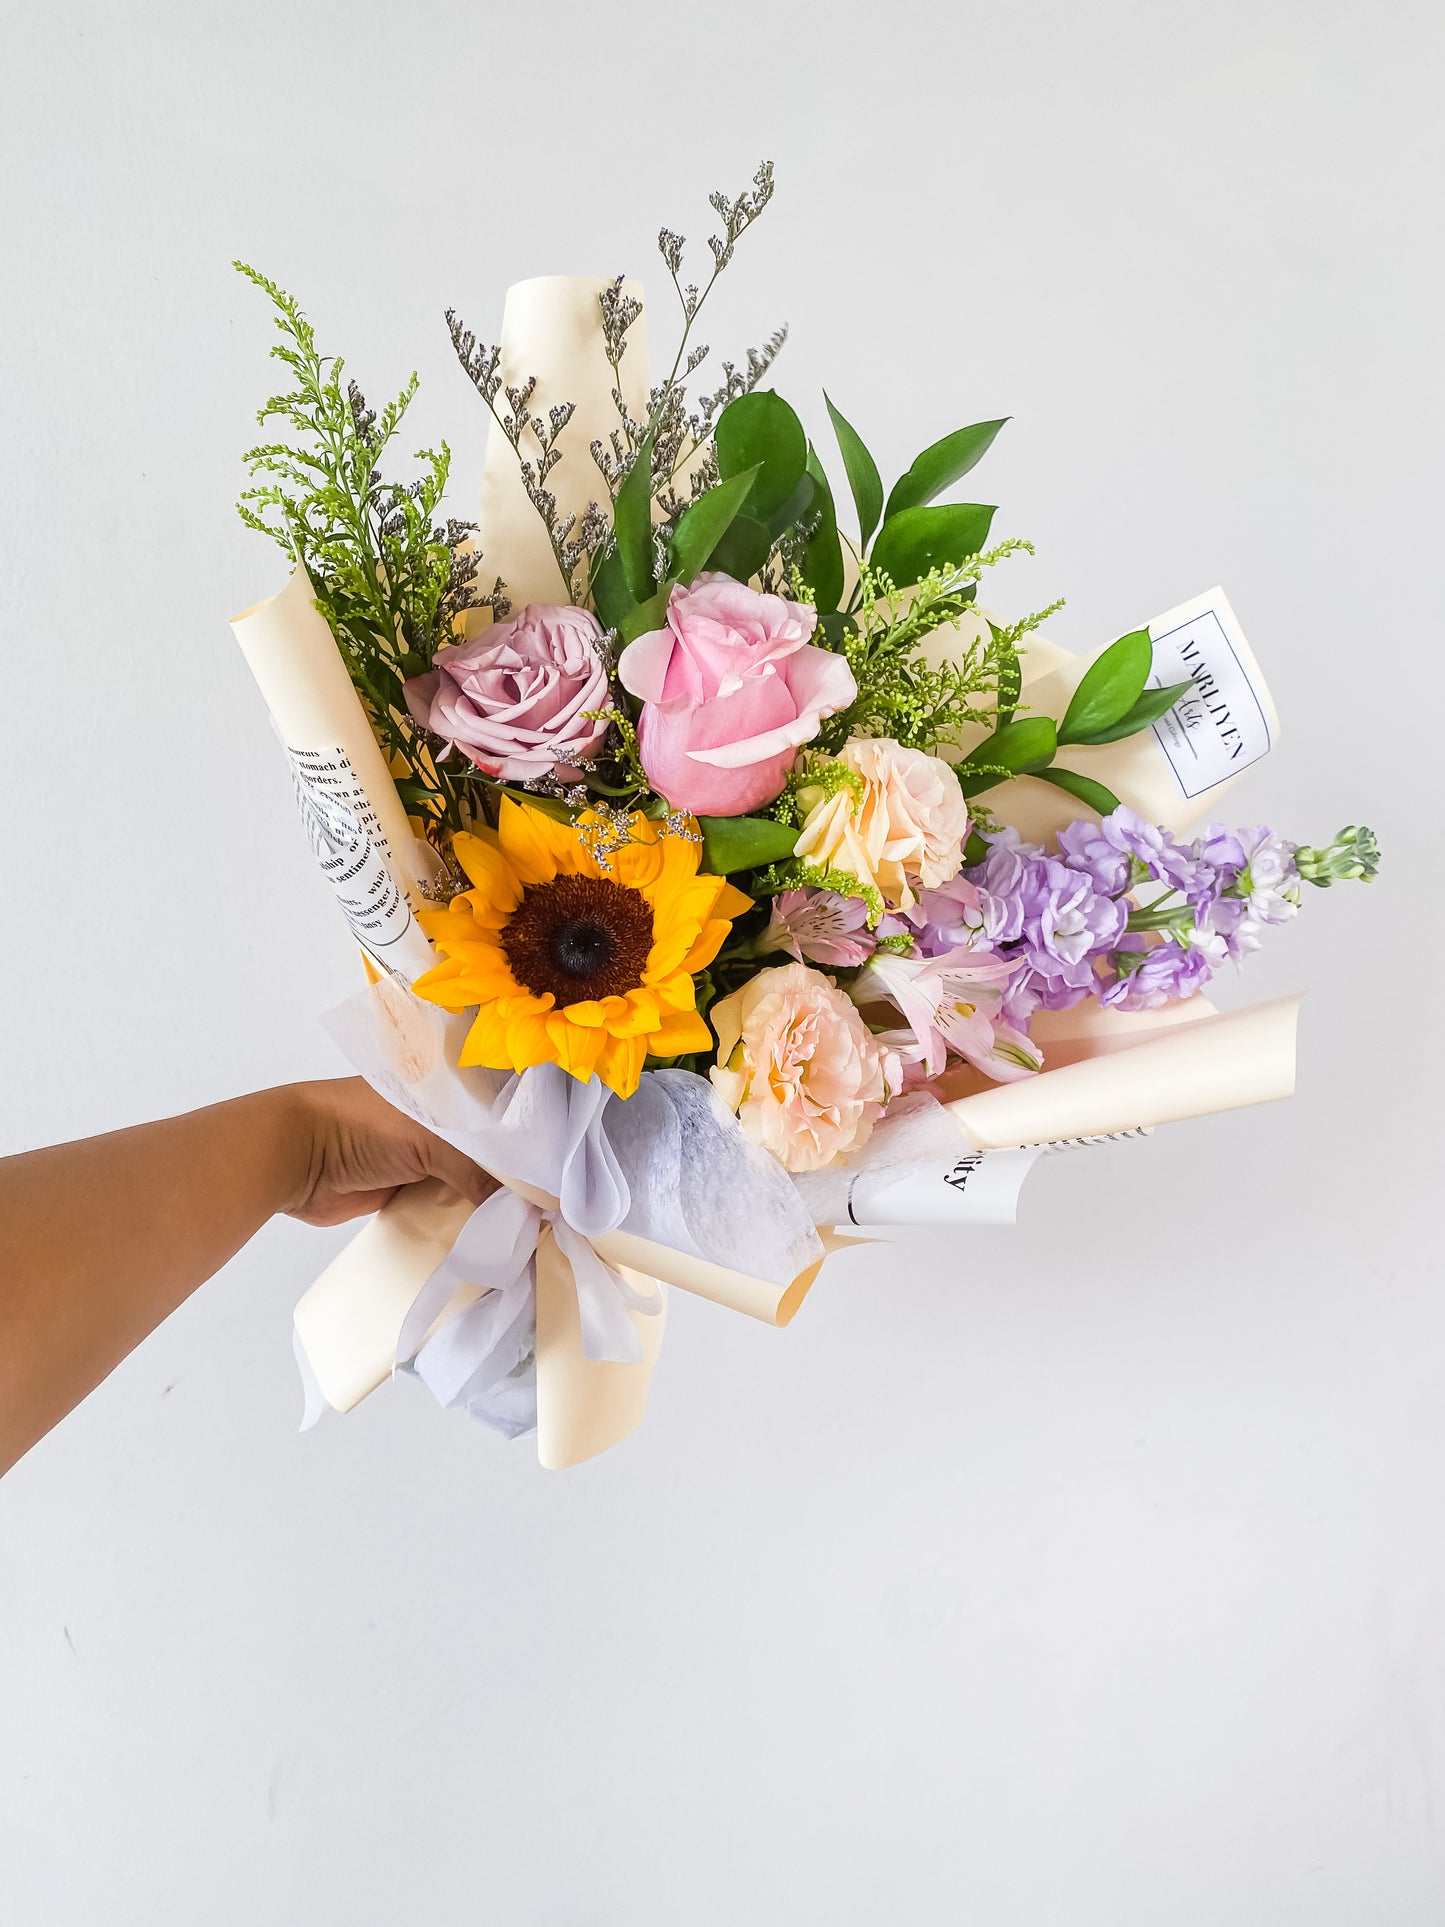 Any Day Florist'Sky Blush Fresh Flower Bouquet'
A stunning arrangements of Pink and Champagne Roses that is highly recommended to gift for Birthday, Anniversary or Monthsary!

ComeSky Blush | Hand Bouquet of the Week